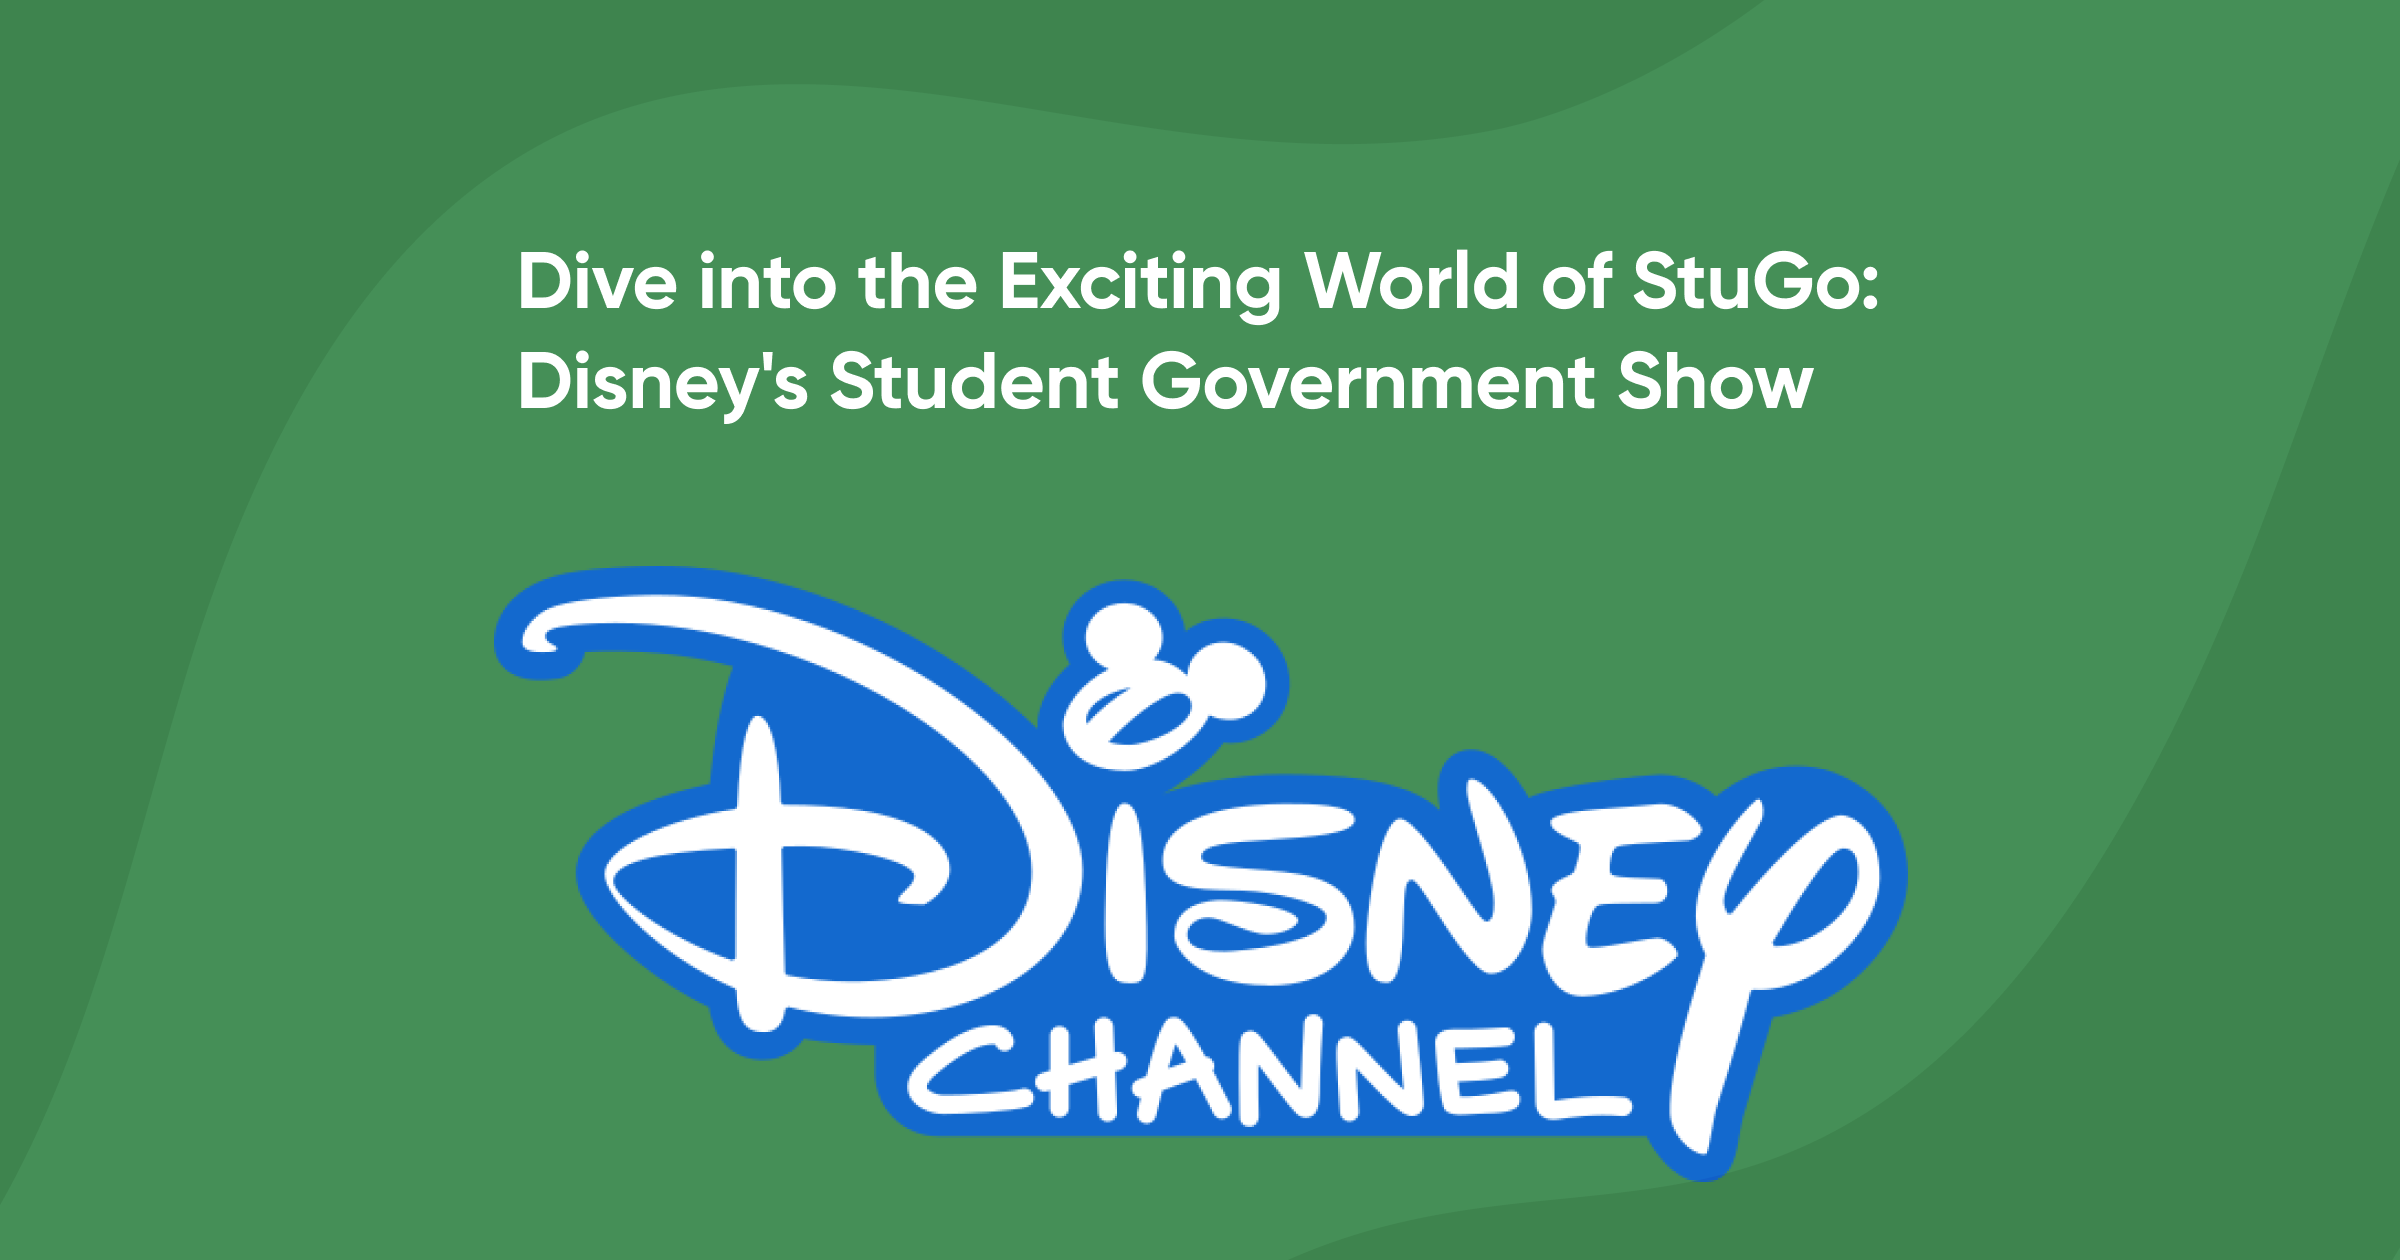 Dive into the Exciting World of StuGo: Disney's Student Government Show